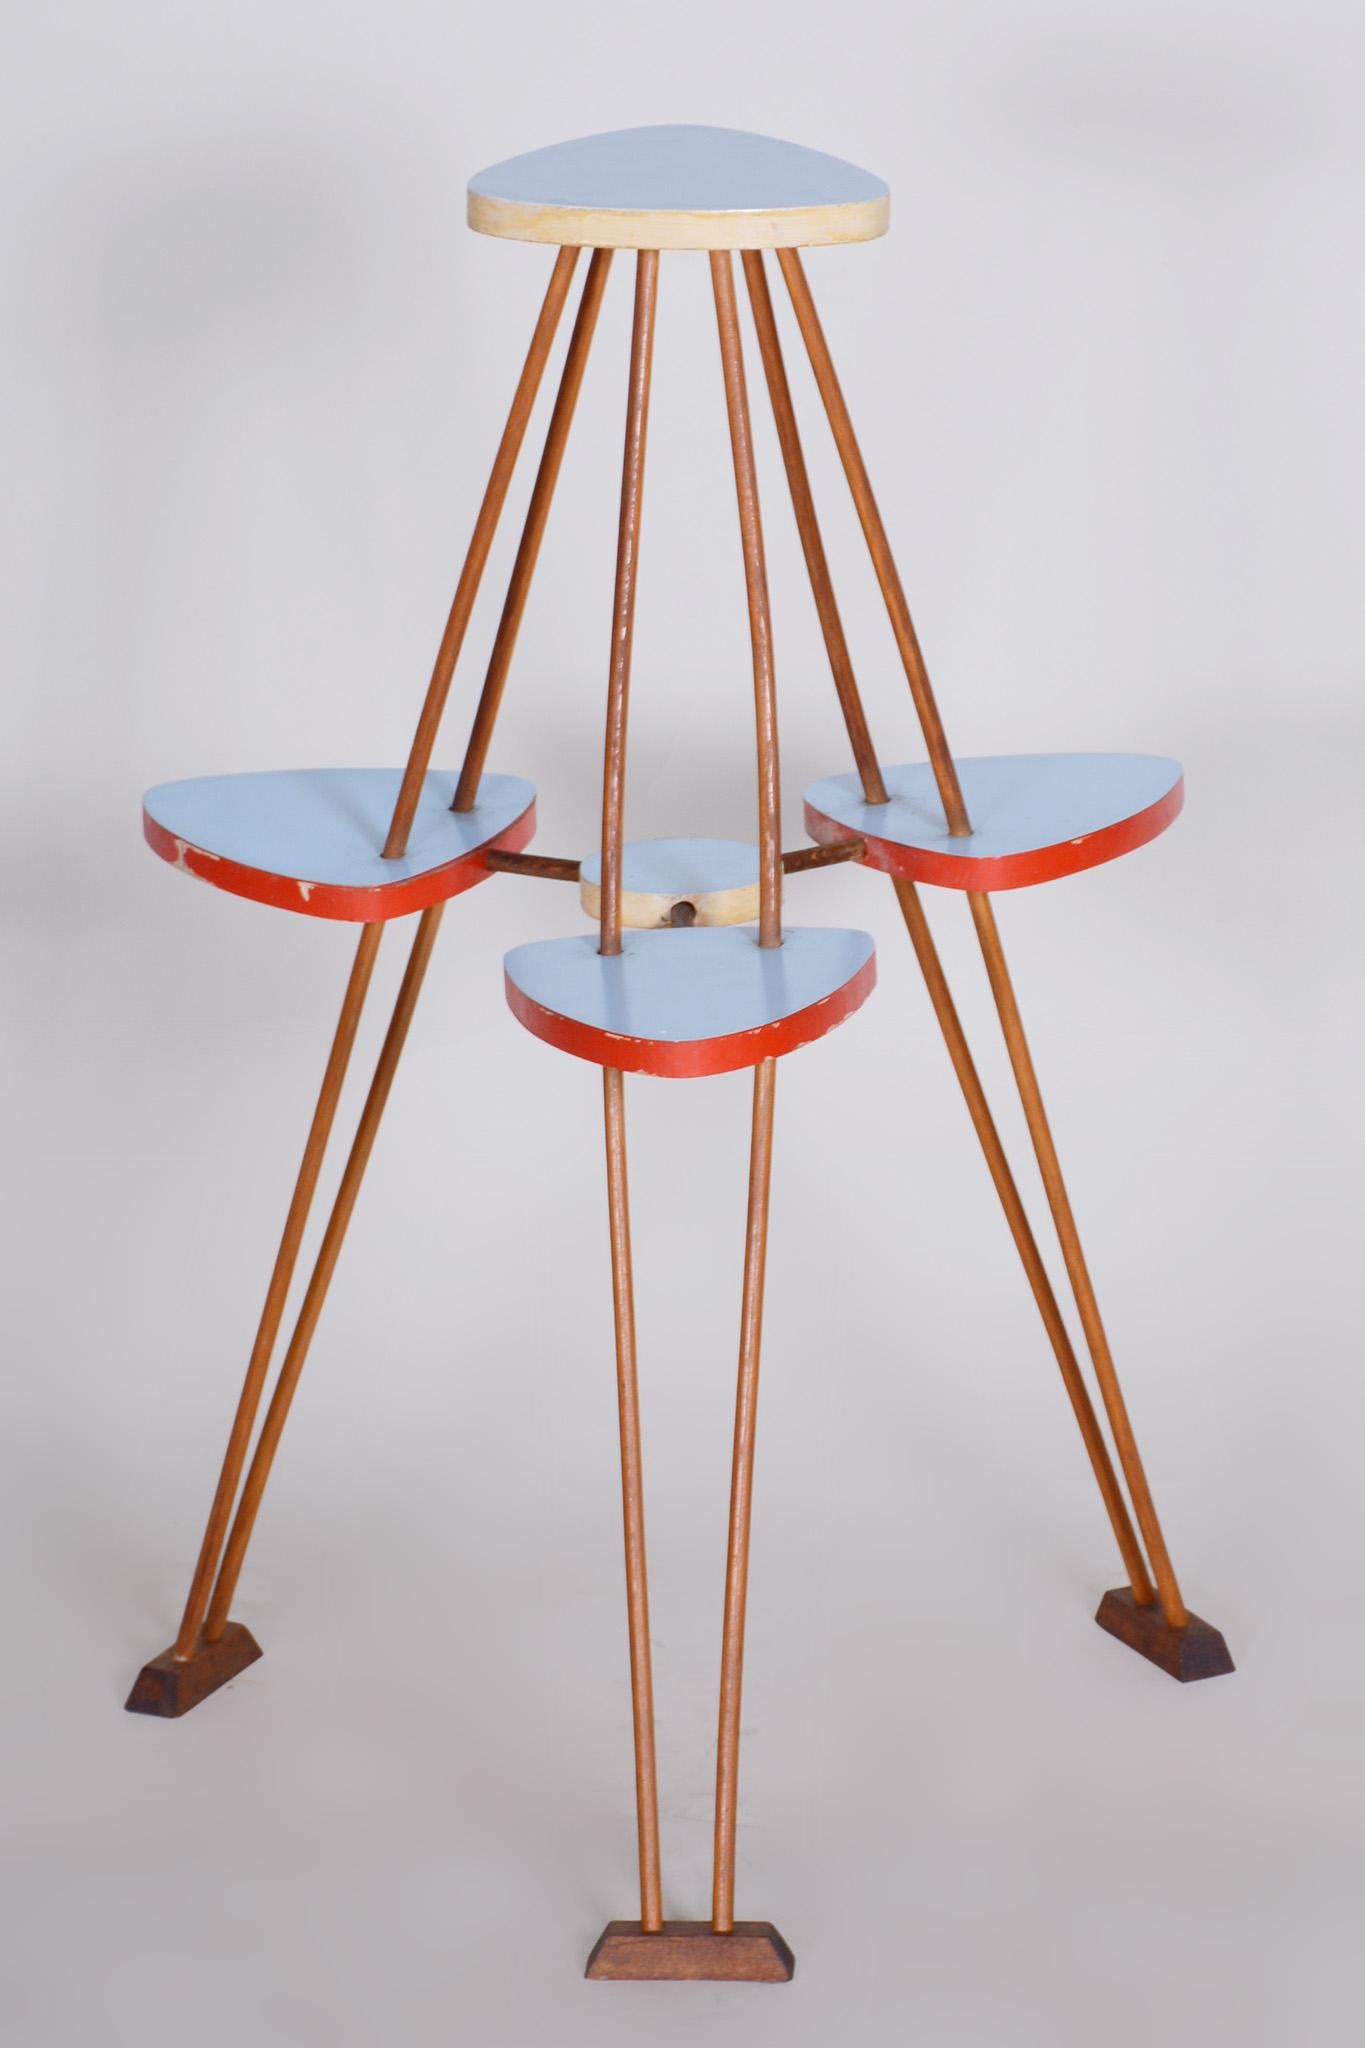 Wood Unusual Restored Mid-Century Flower Stand, Beech and Umakart, Czechia, 1950s For Sale